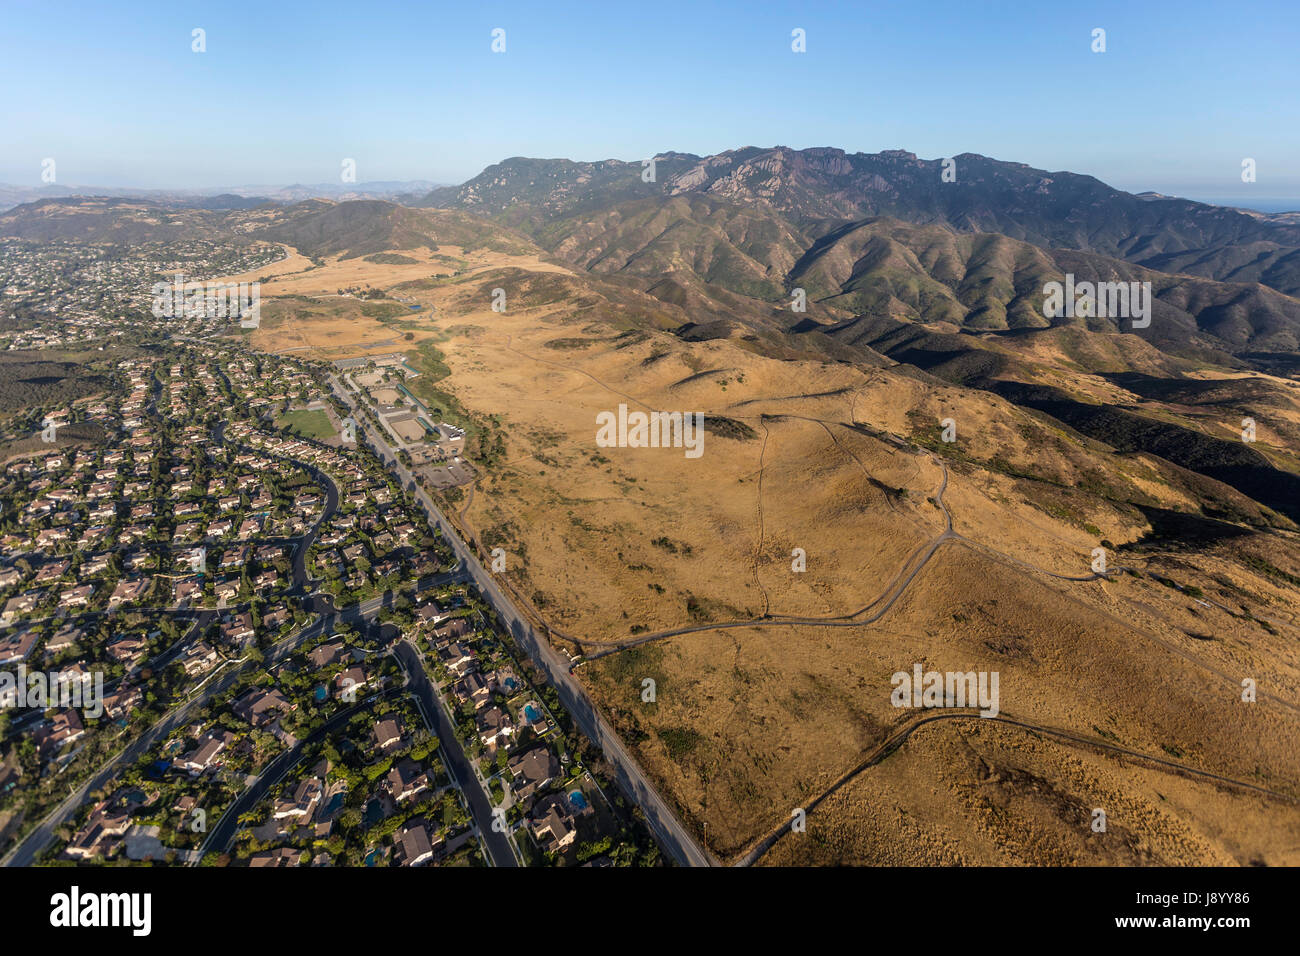 Aerial view of Newbury Park and the Santa Monica Mountains National Recreation Area in Ventura County, California. Stock Photo